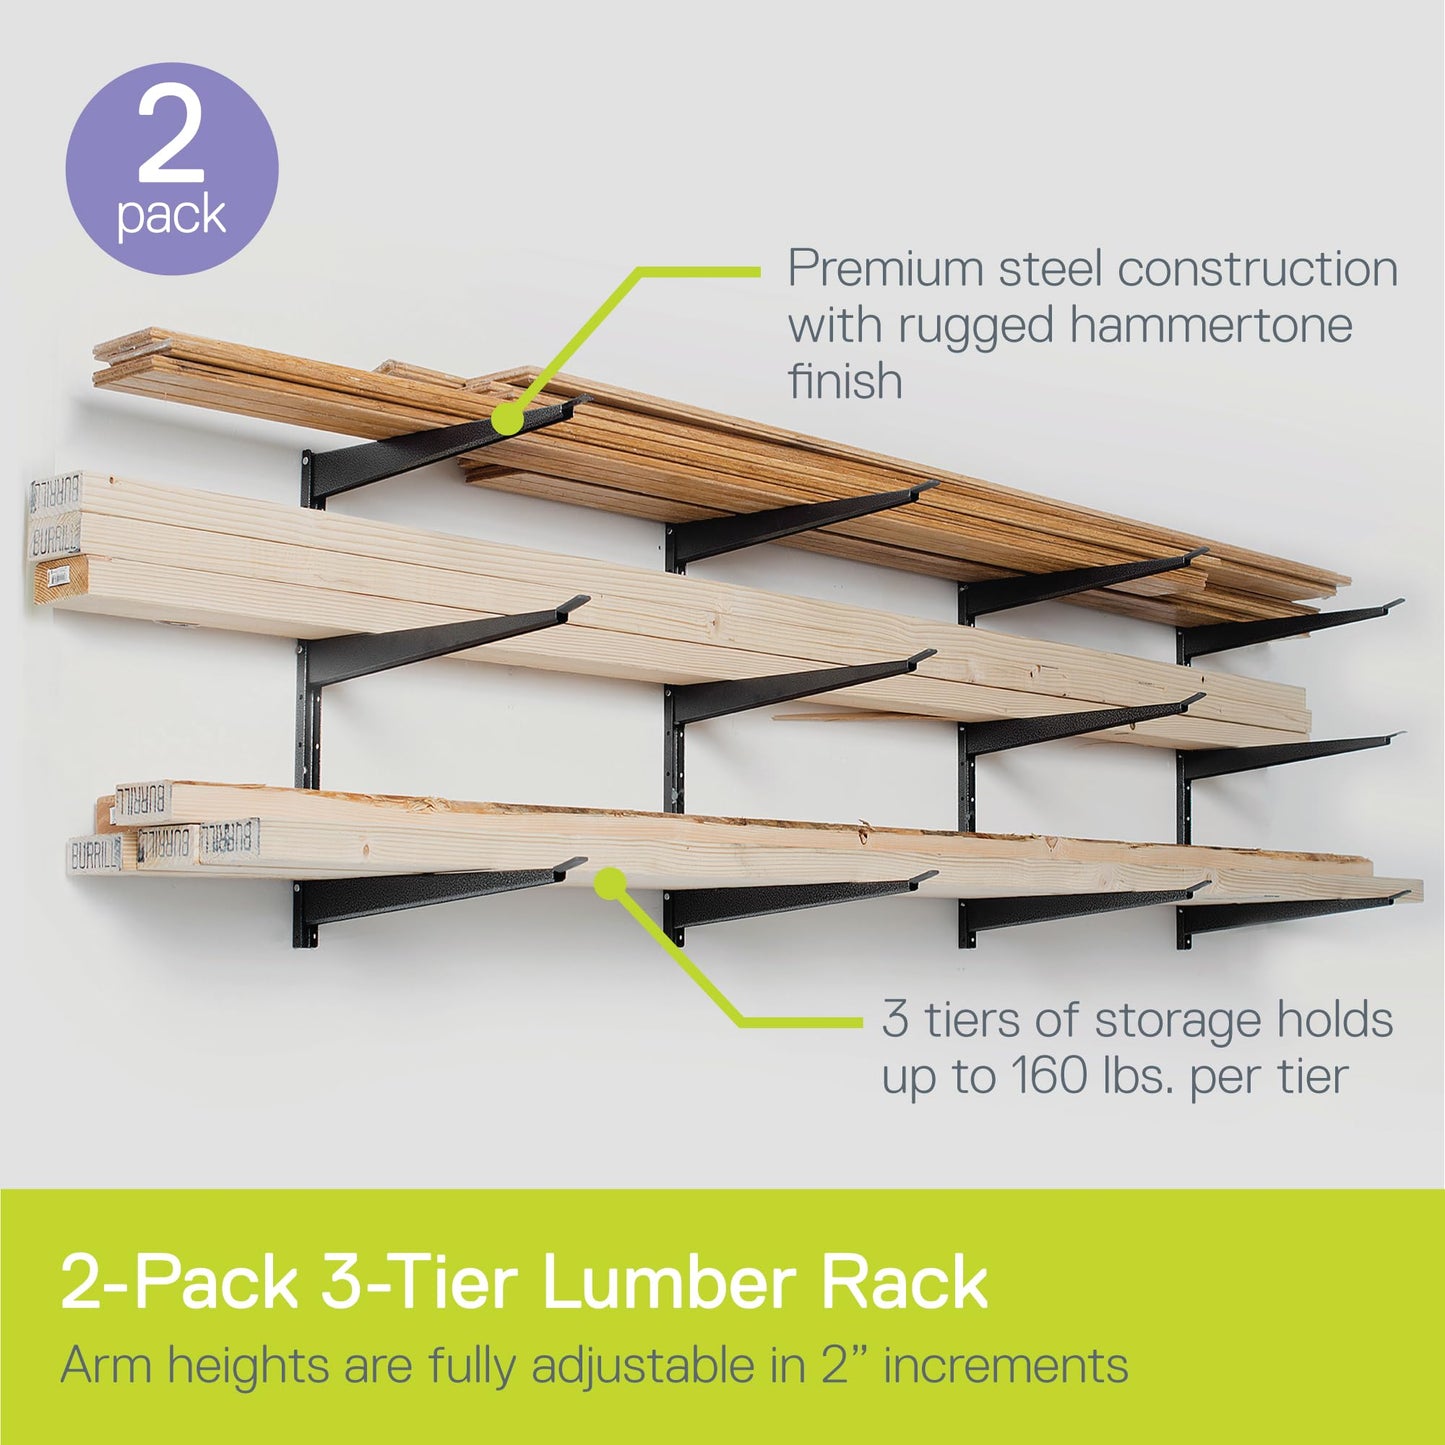 Heavy Duty Wood and Lumber Storage Rack (2-Pack), Holds Up To 960 lbs - Easy to Install Mounted Rack - Steel Construction Storage Solution For